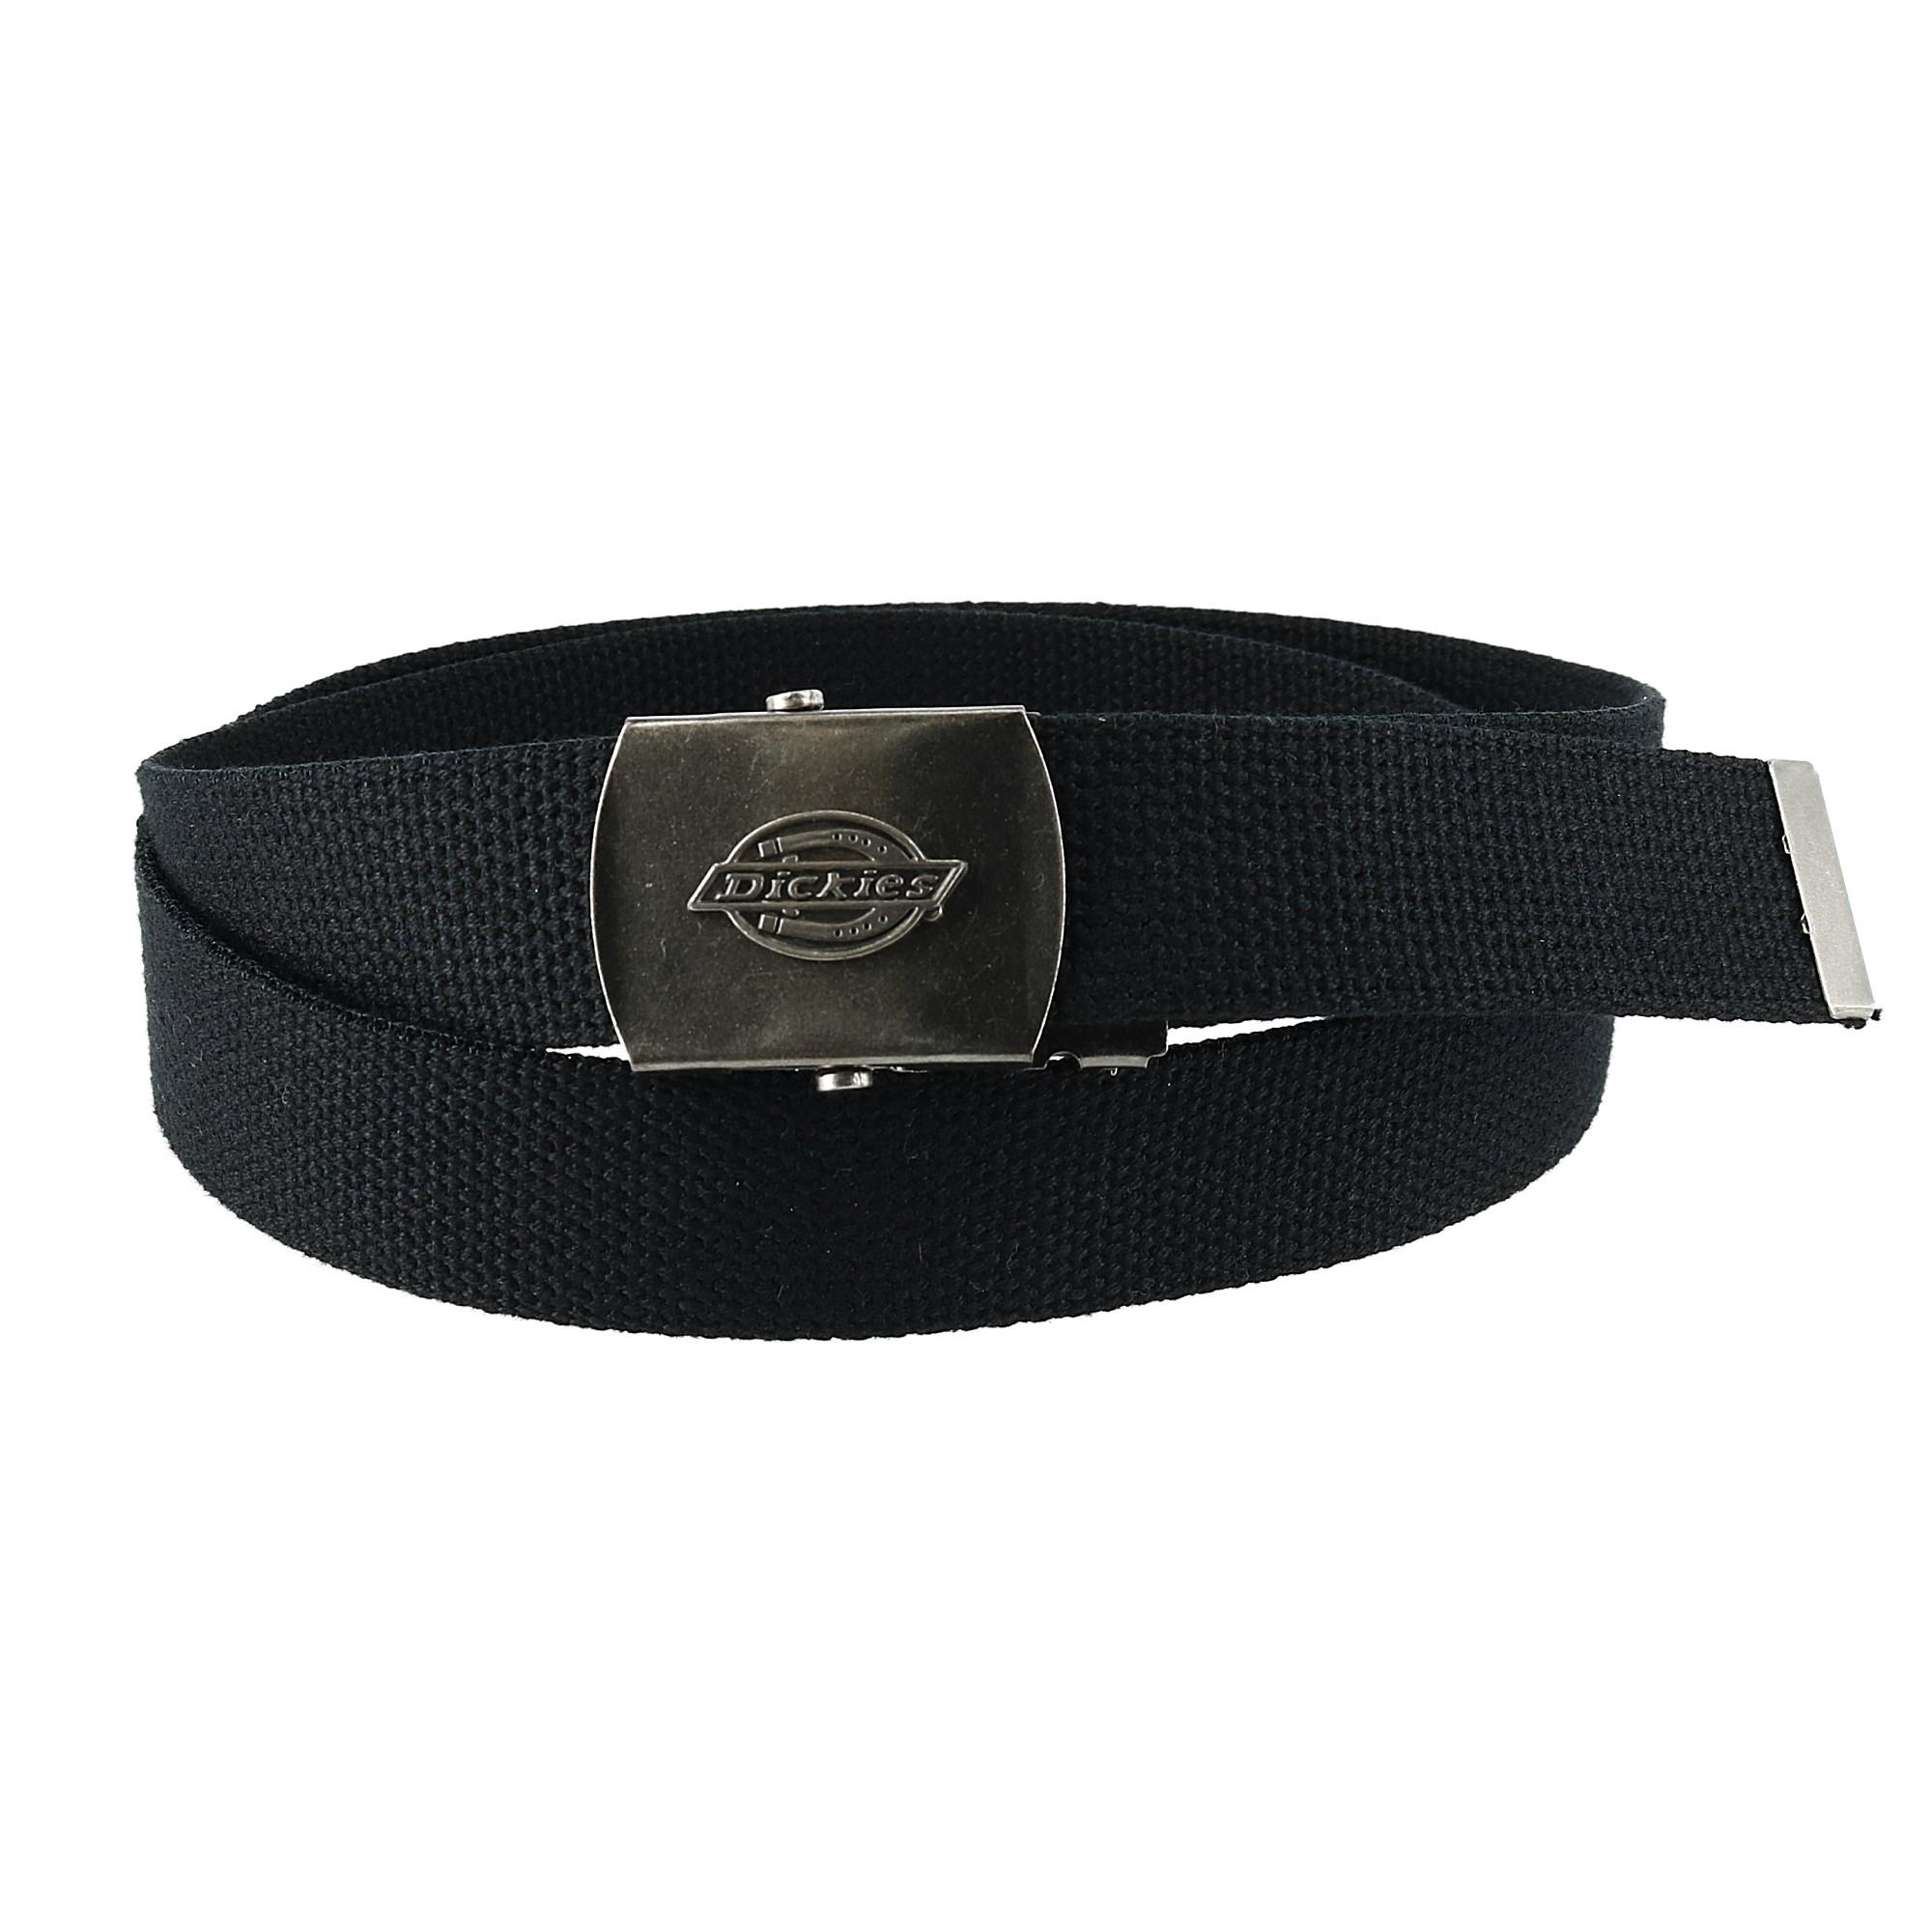 Dickies Men's Adjustable Fabric Belt with Military Buckle